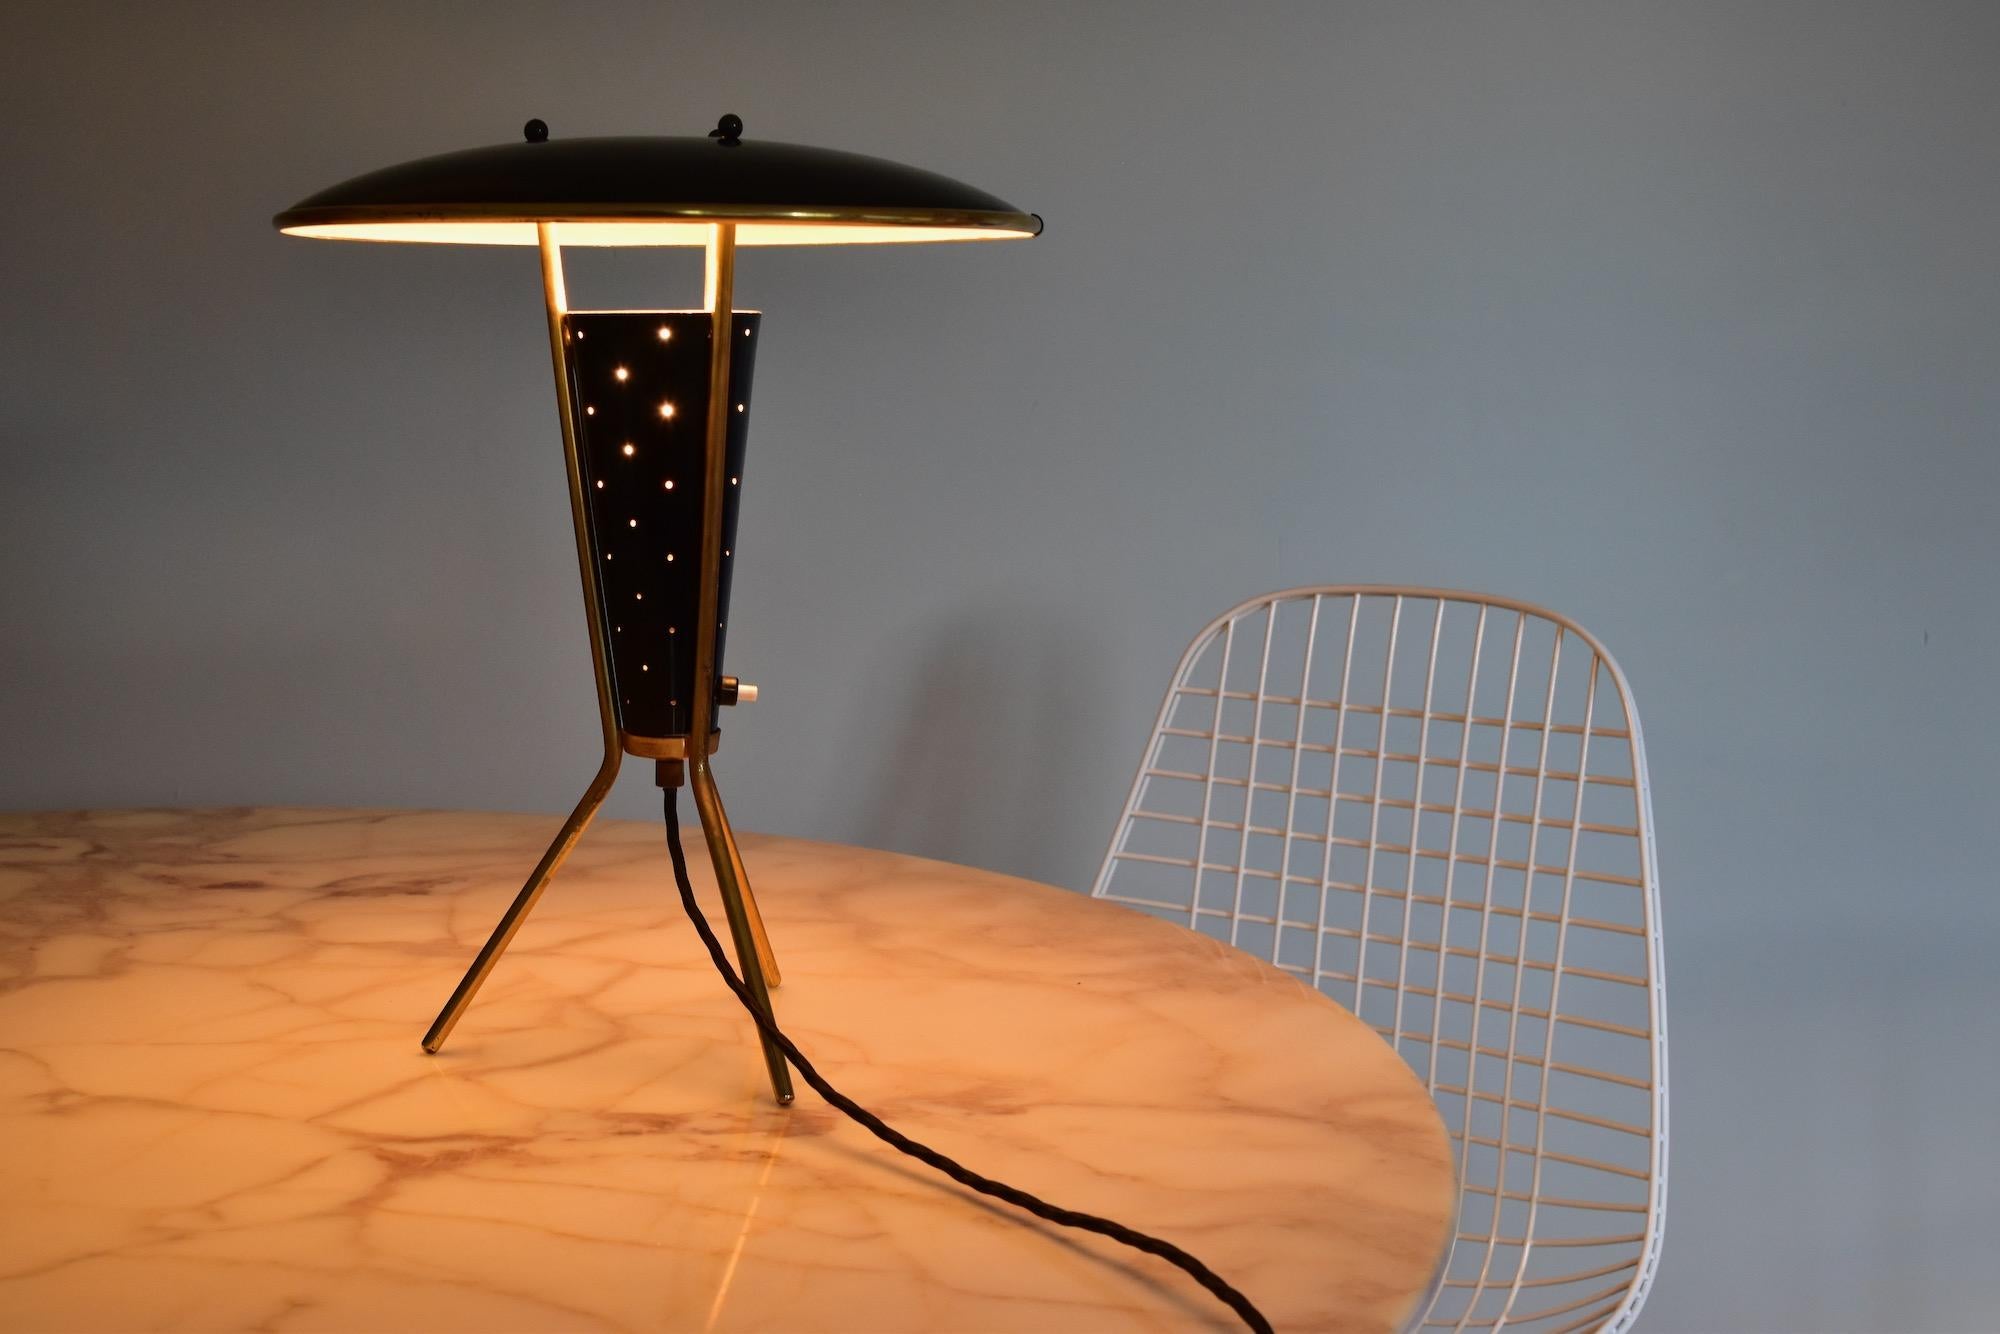 Painted German Brass Atomic Tripod Table Lamp 1960's with Perforated Shade